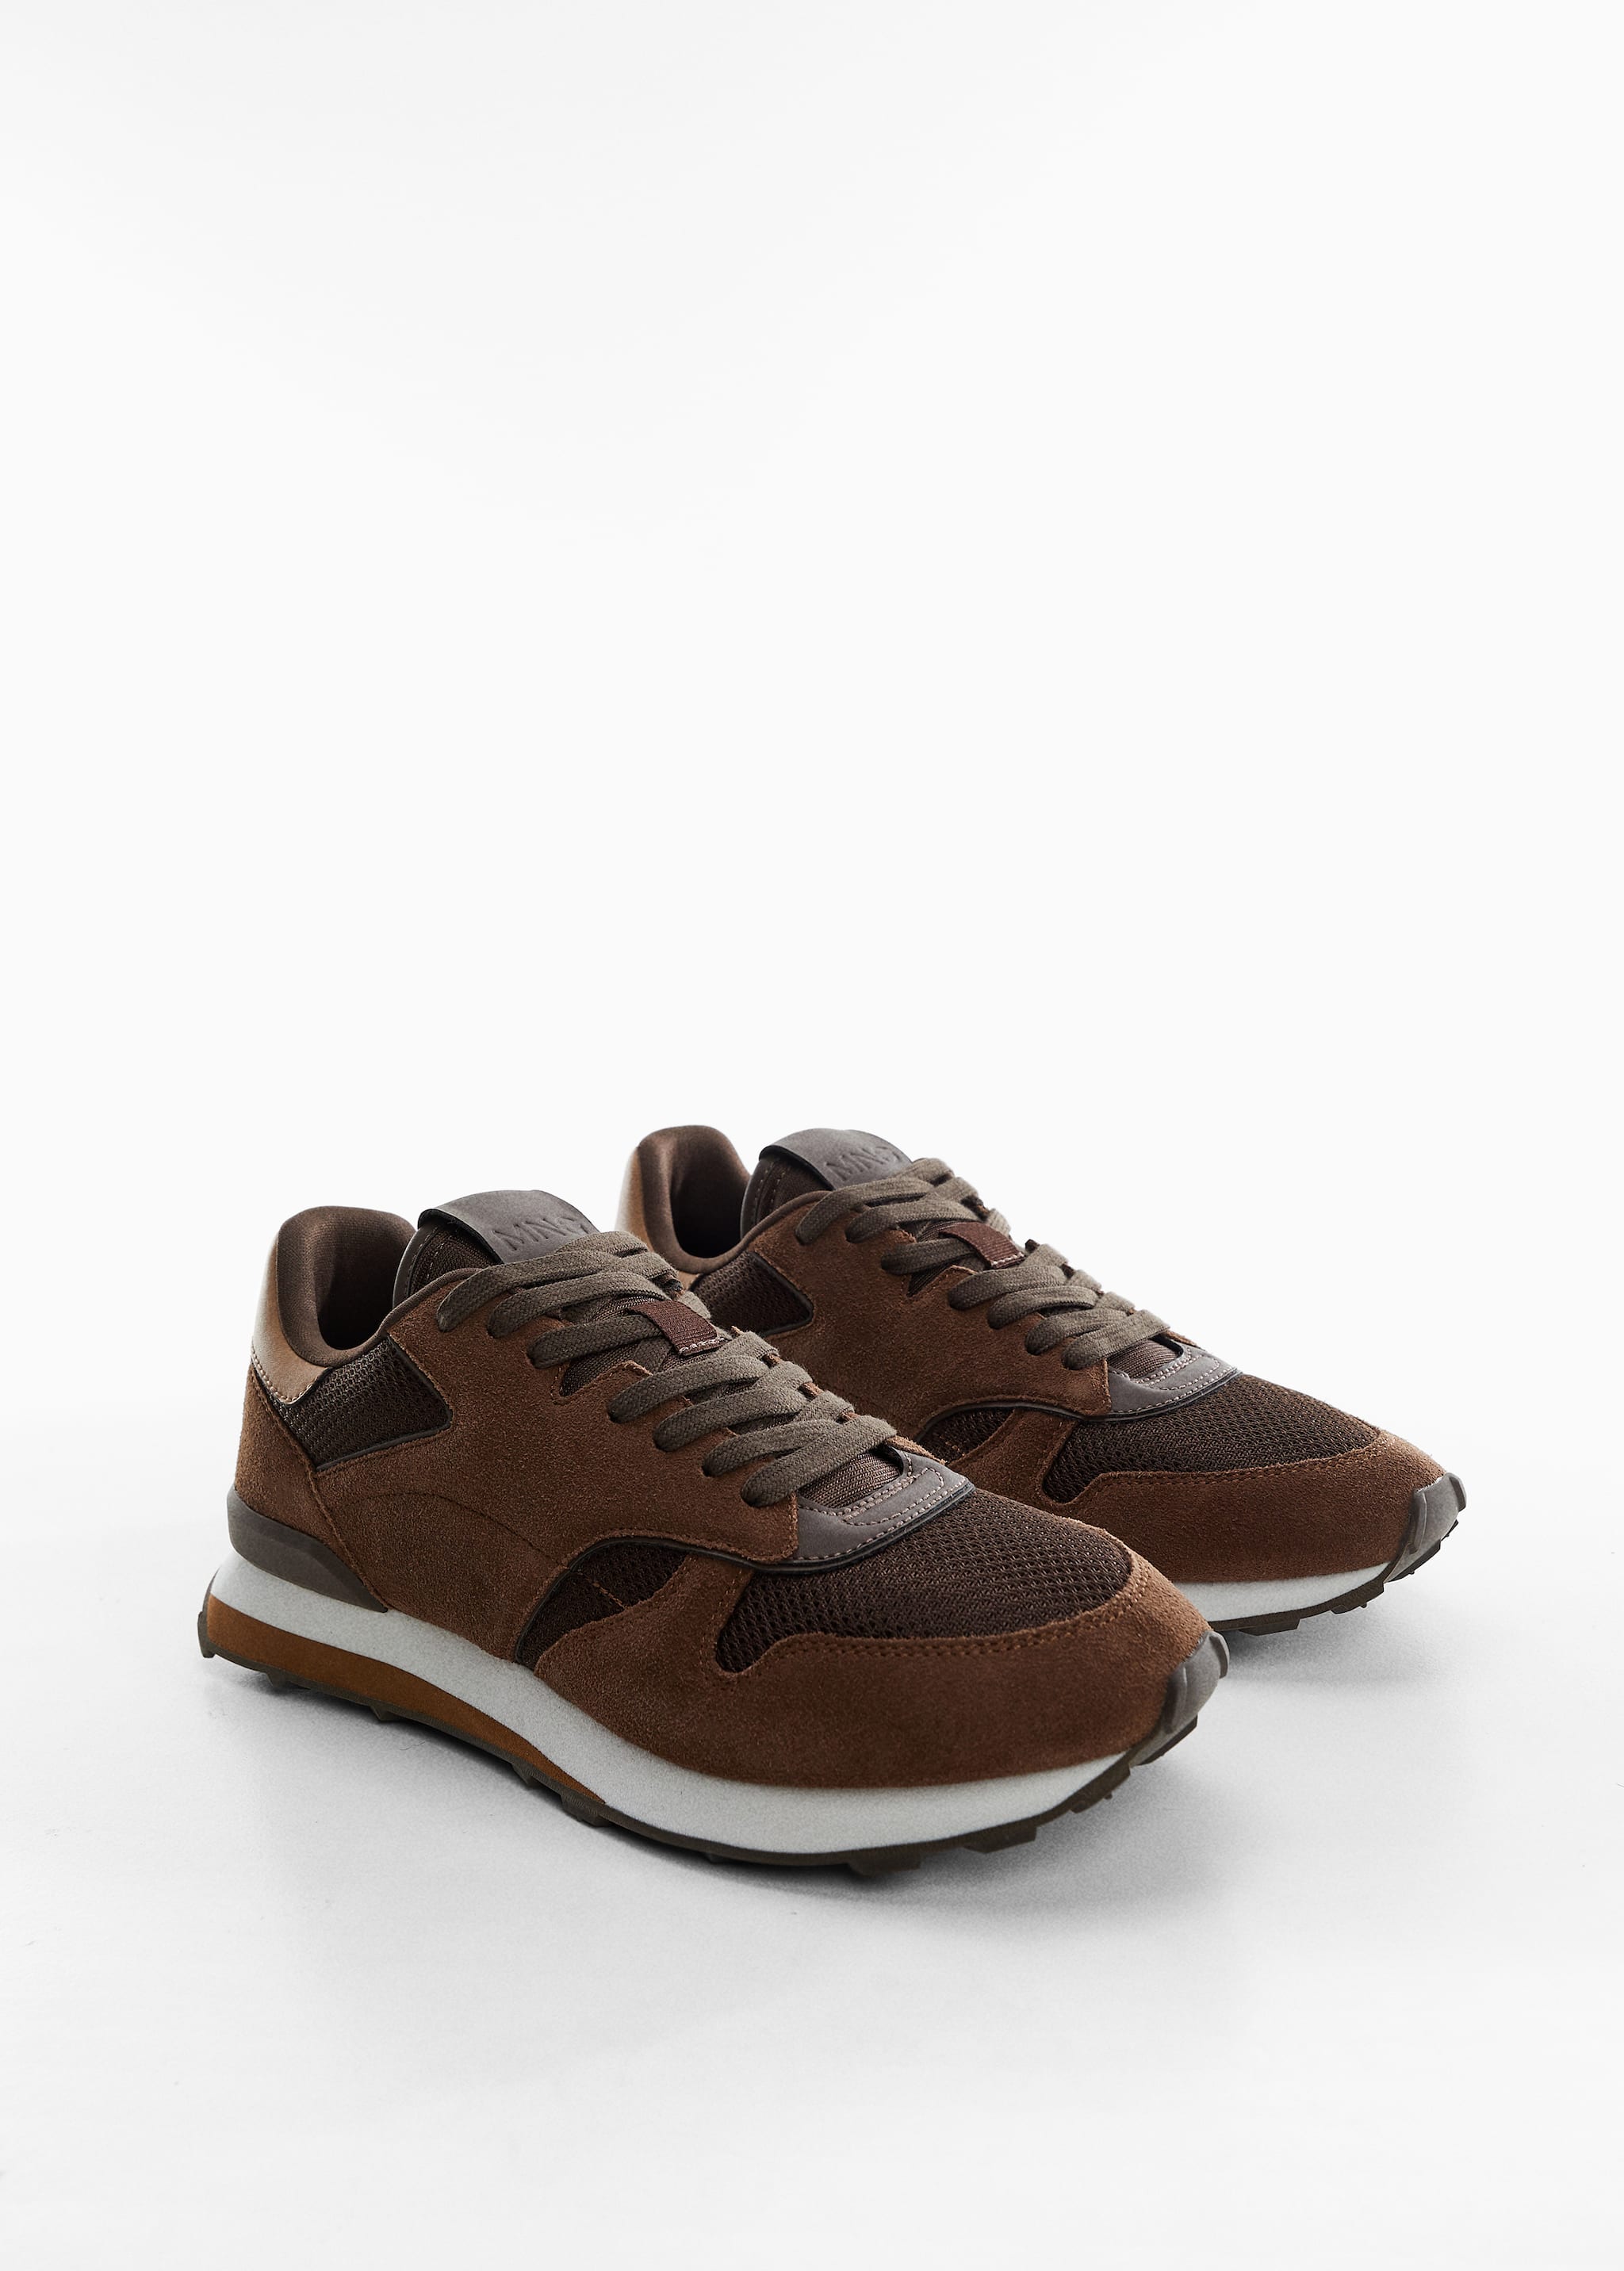 Combined leather sneakers - Medium plane